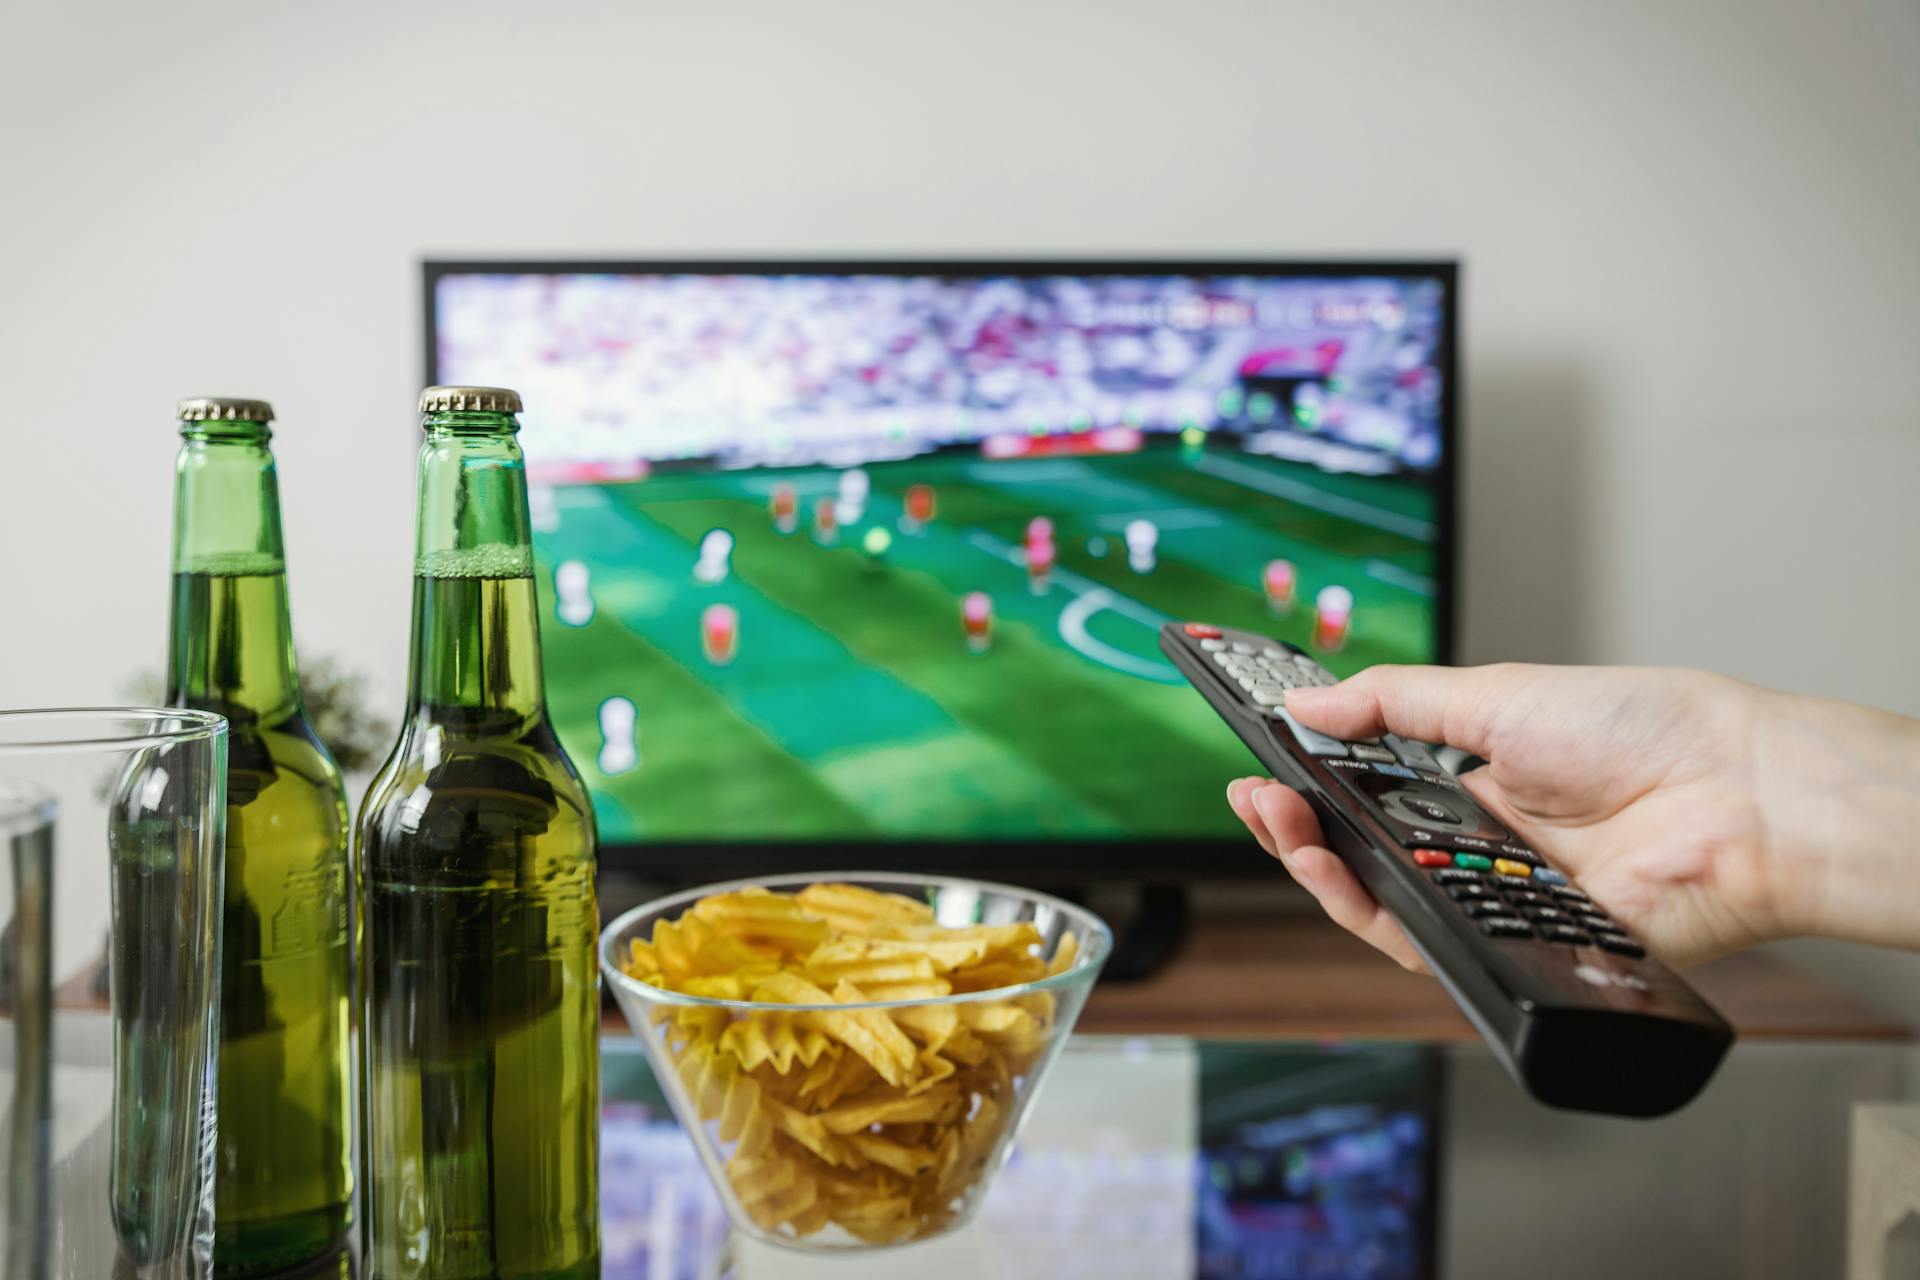 A person watching sport on TV | Source: Pexels